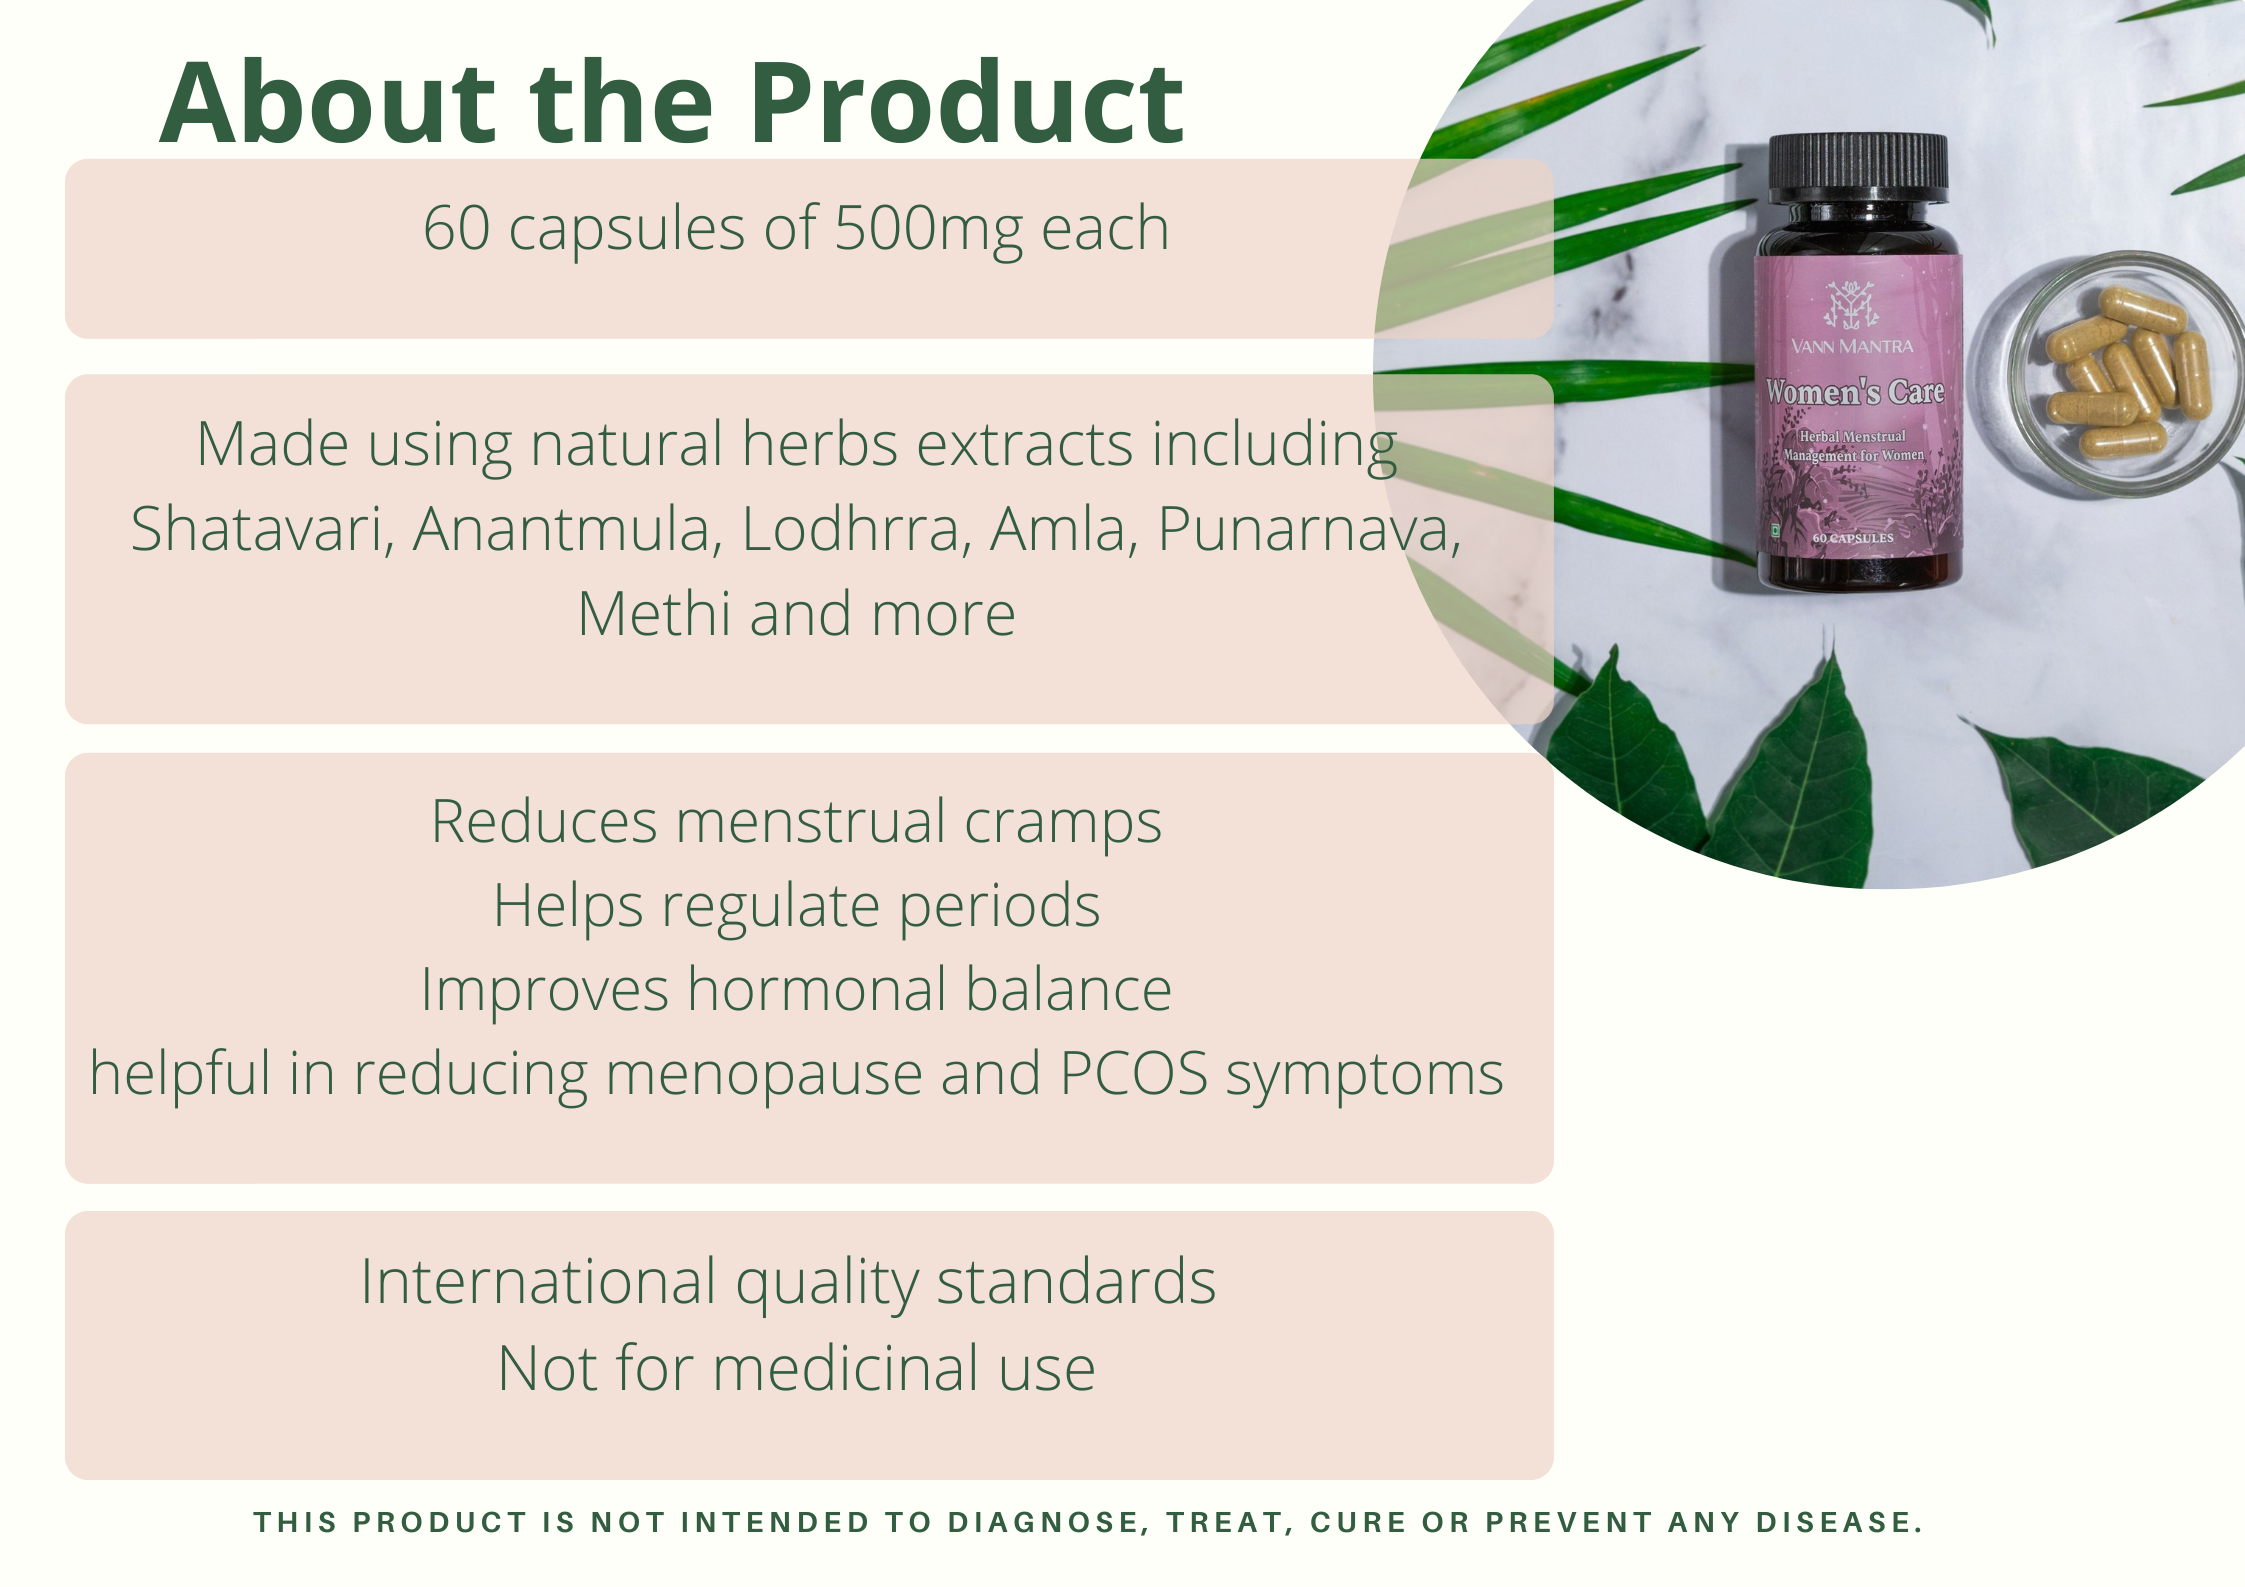 Infographic explaining the features and benefits of Women's Care Capsules.